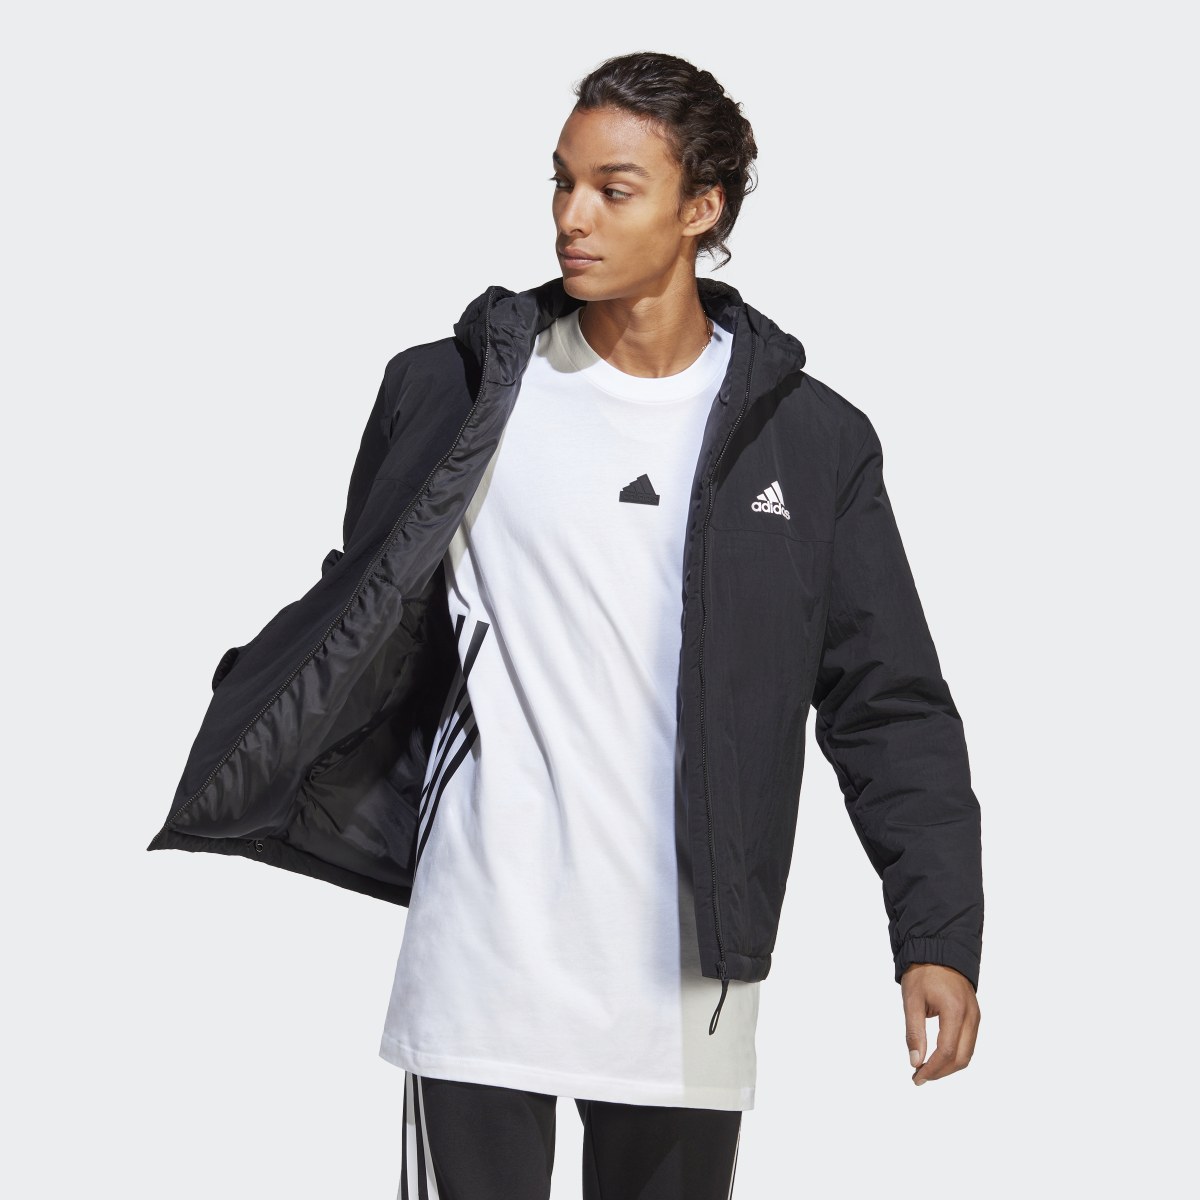 Adidas BSC Sturdy Insulated Hooded Jacket. 4